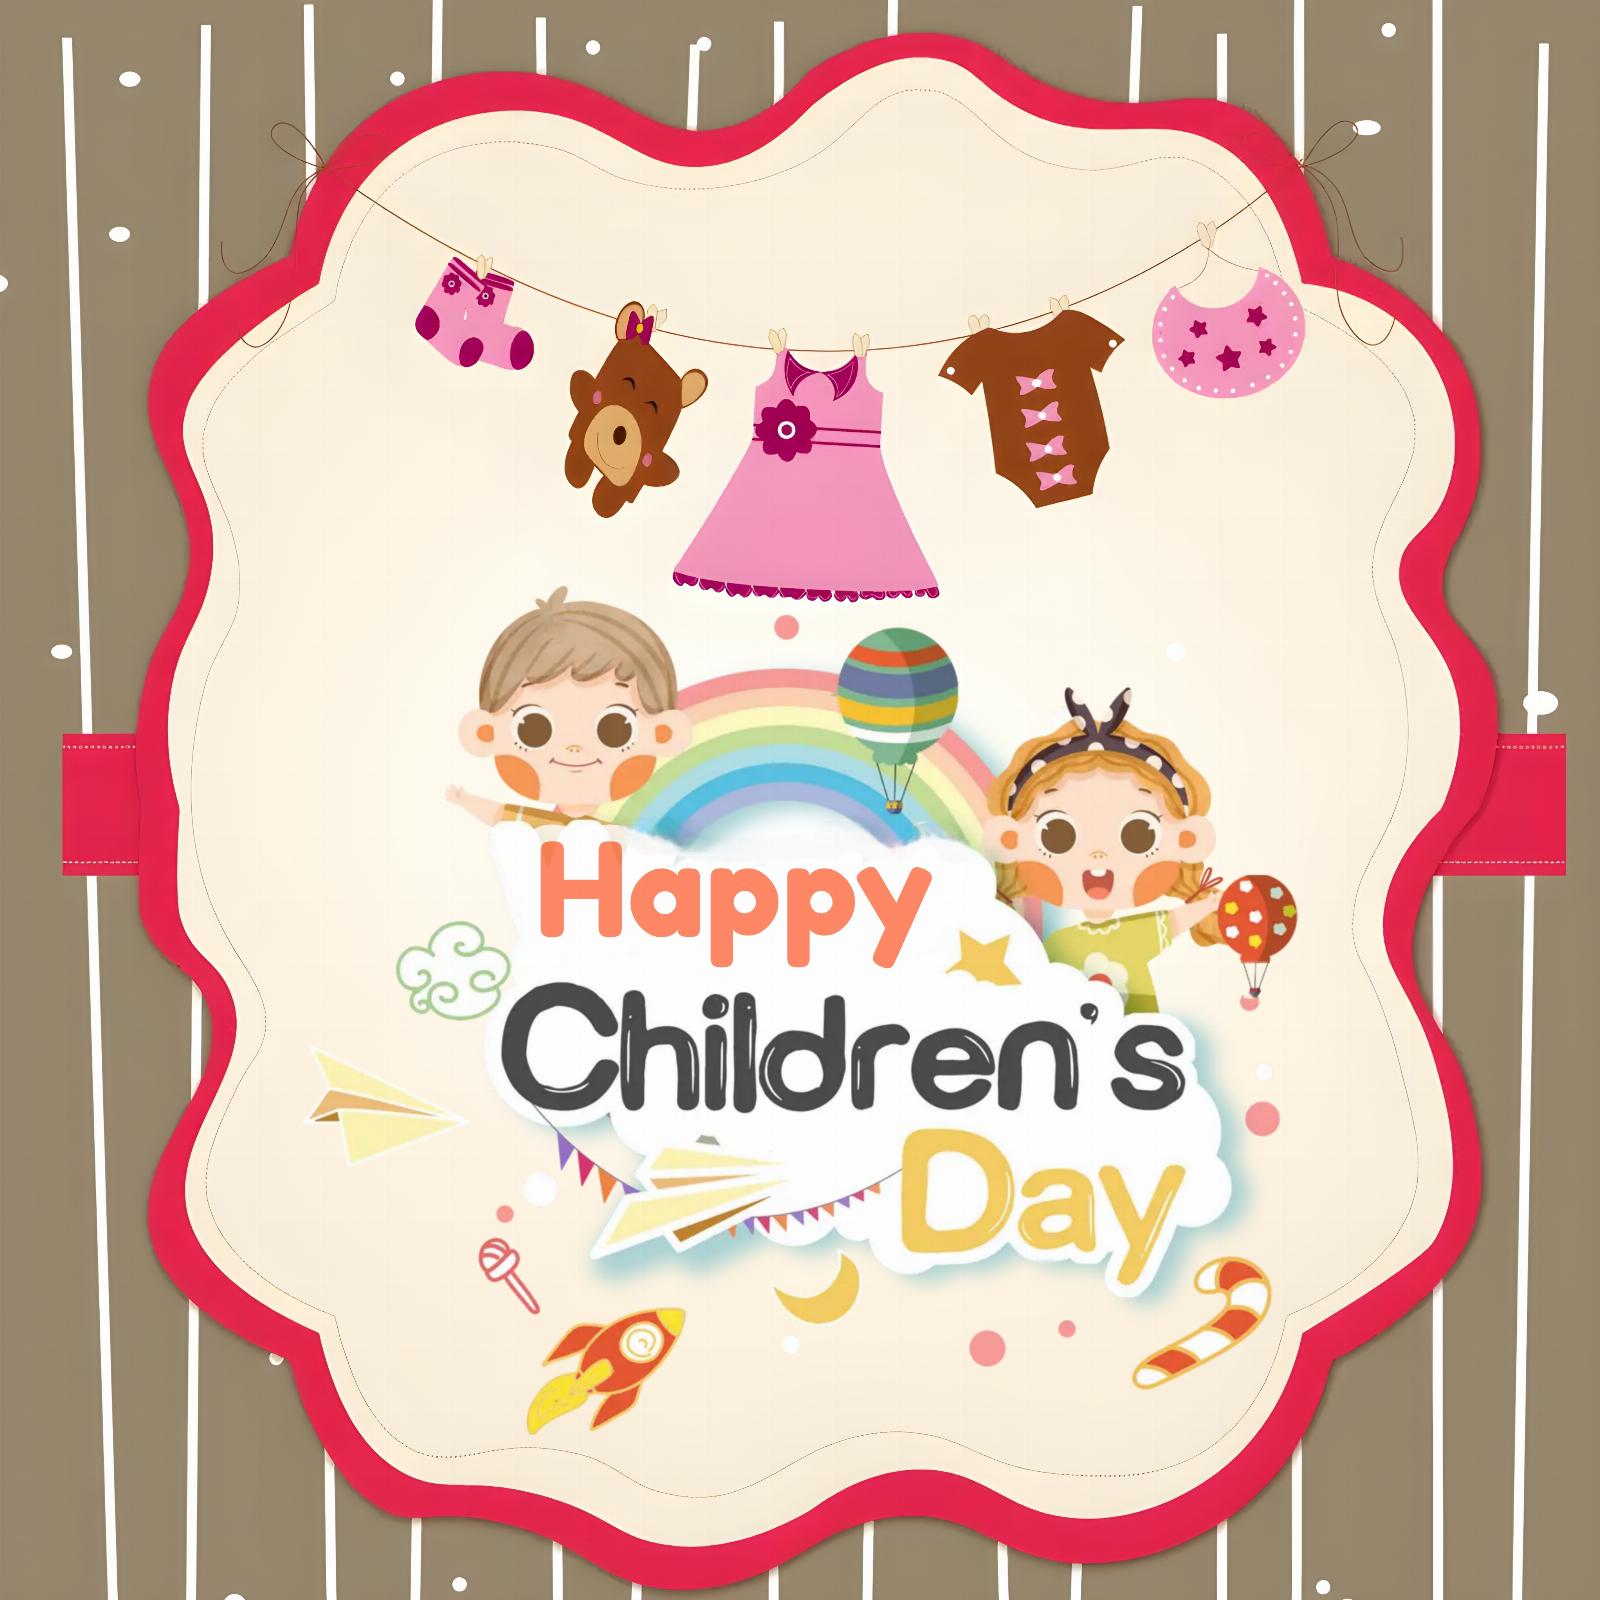 Whatsapp Happy Childrens Day Images